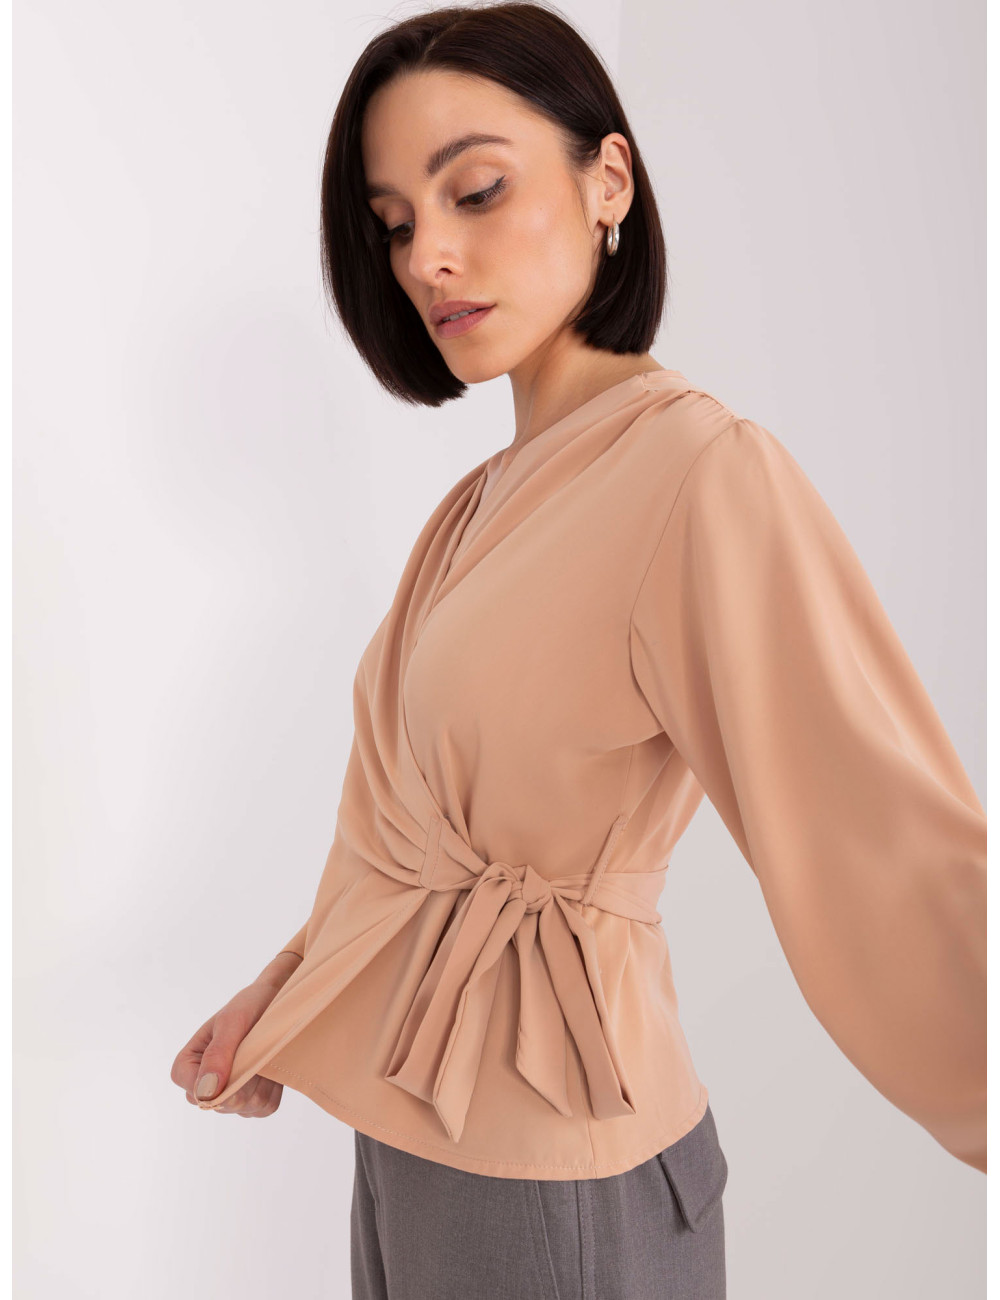 Camel formal blouse with tie 